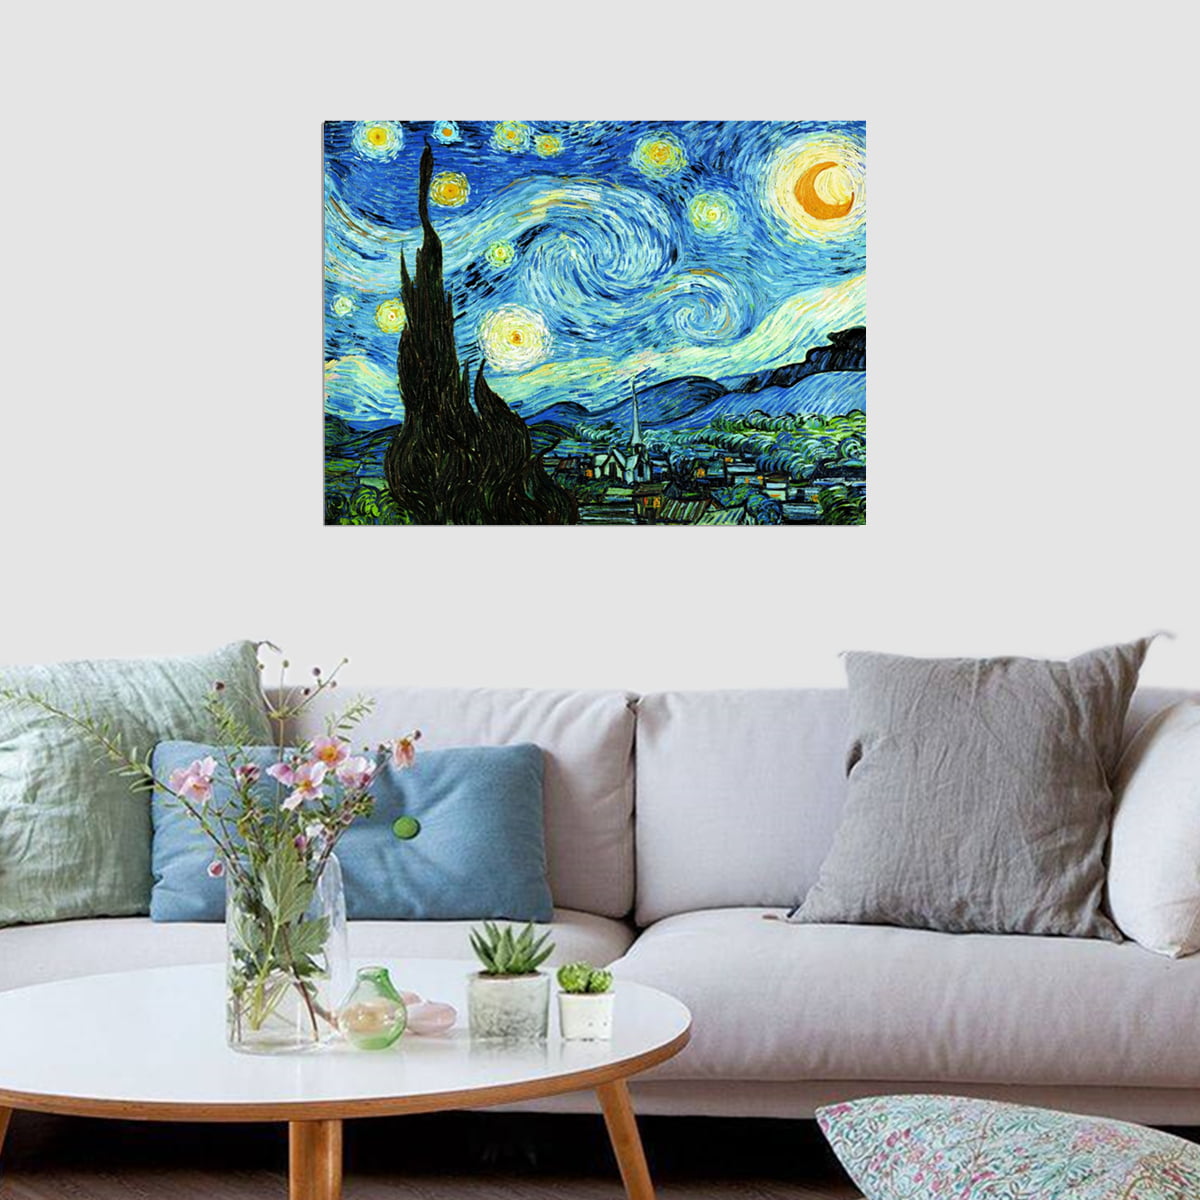 4 Packs Diamond Painting Kits, Big Size 16 inchx20 inch Extra Large Famous Paintings by Van Gogh Full Drill Paint by Number 5D Diamond Art, DIY